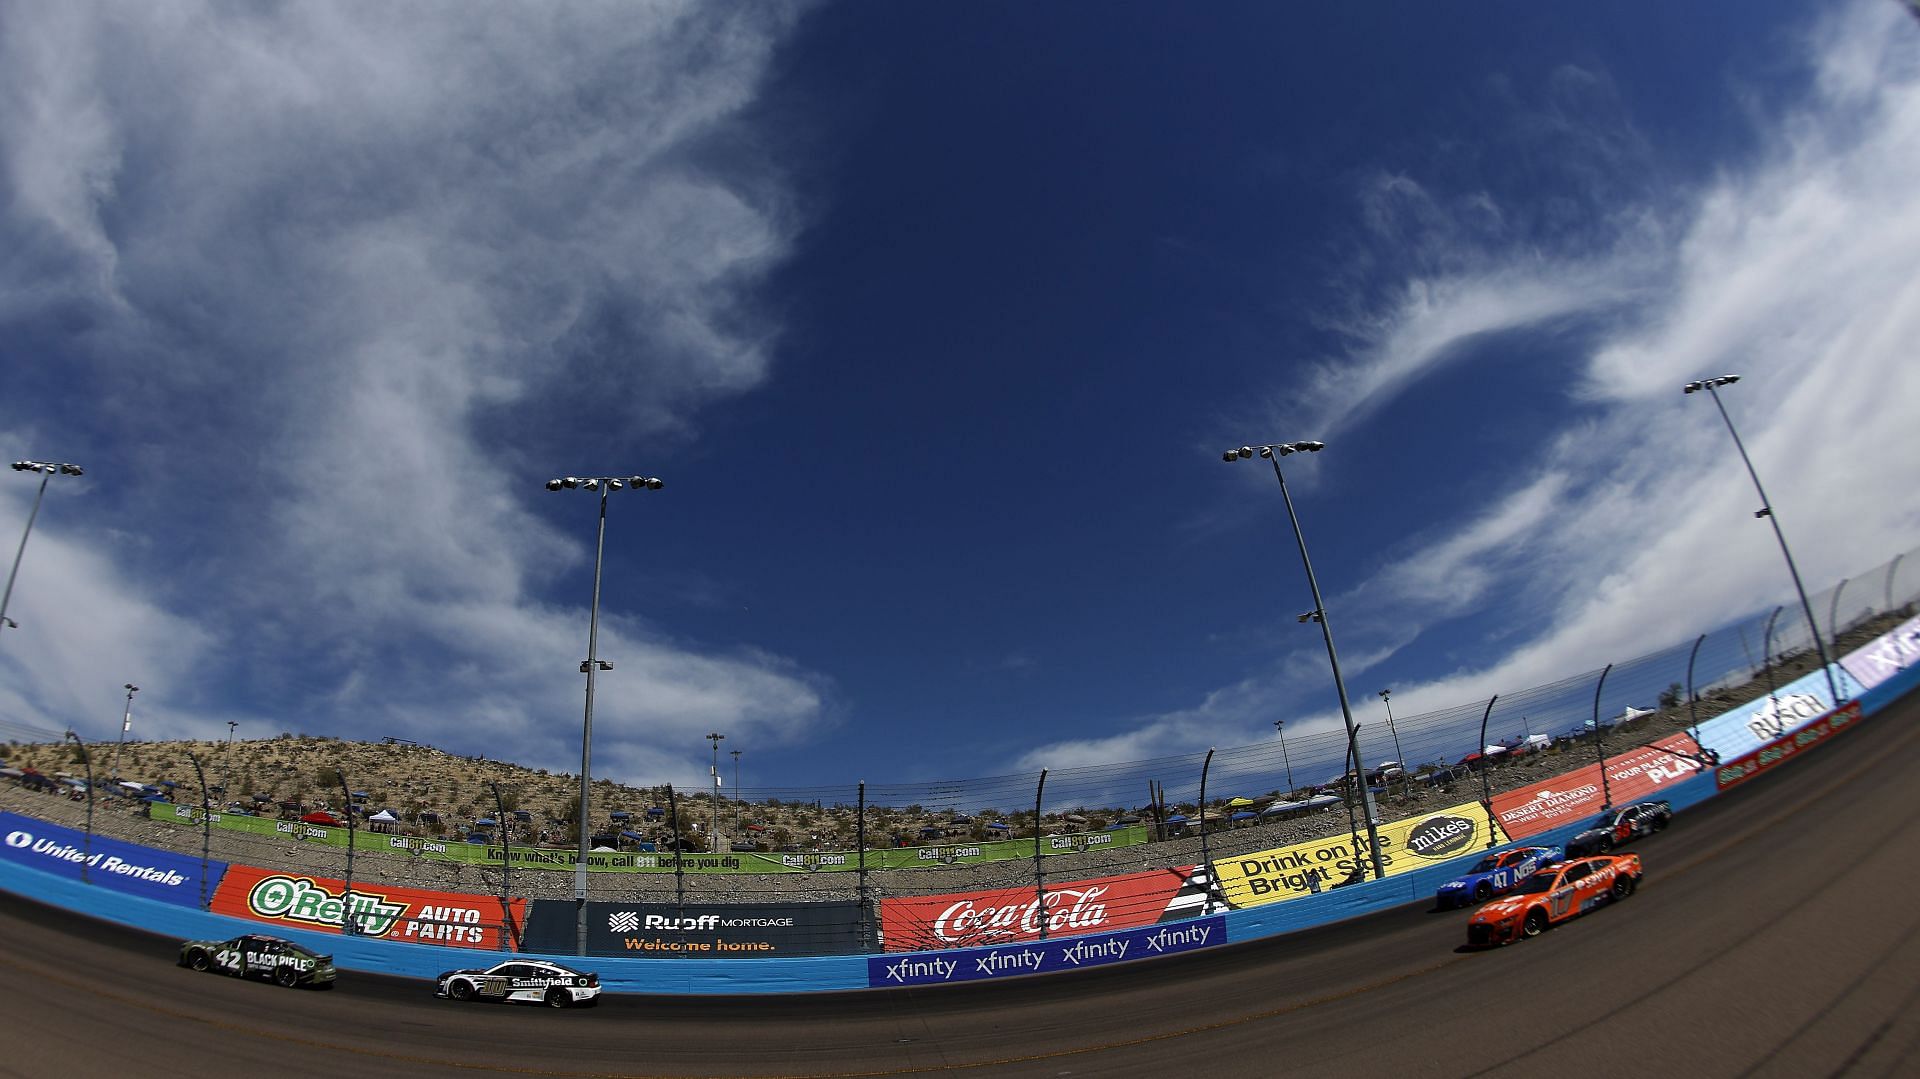 Cars race during the the Ruoff Mortgage 500 at Phoenix Raceway. (Photo by Sean Gardner/Getty Images)